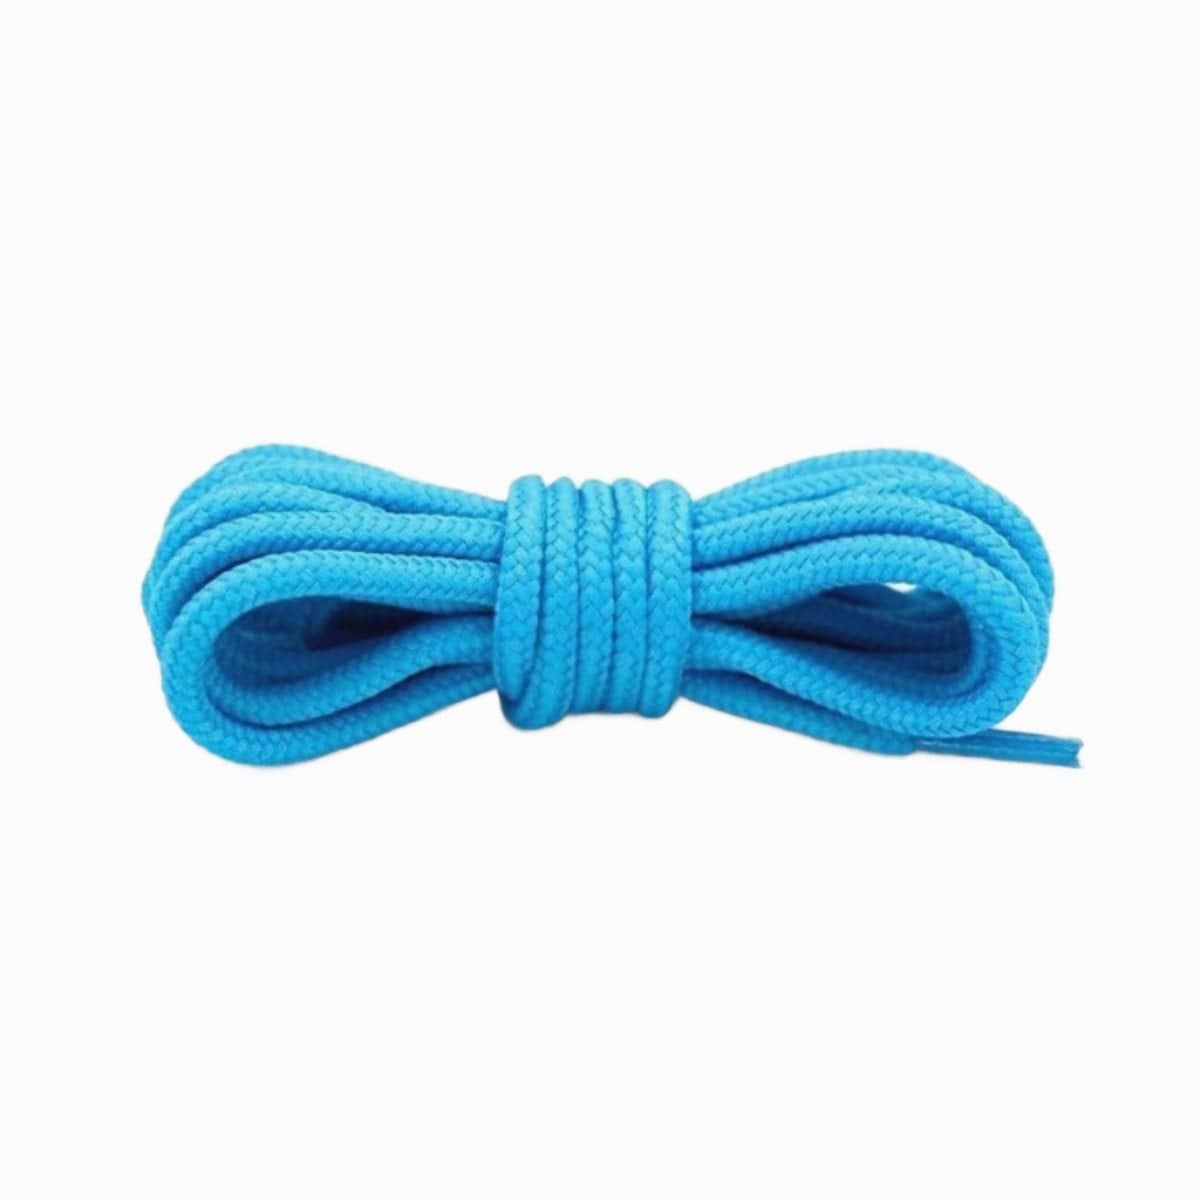 colored-shoelaces-for-cool-ways-to-tie-shoe-with-sky-blue-laces